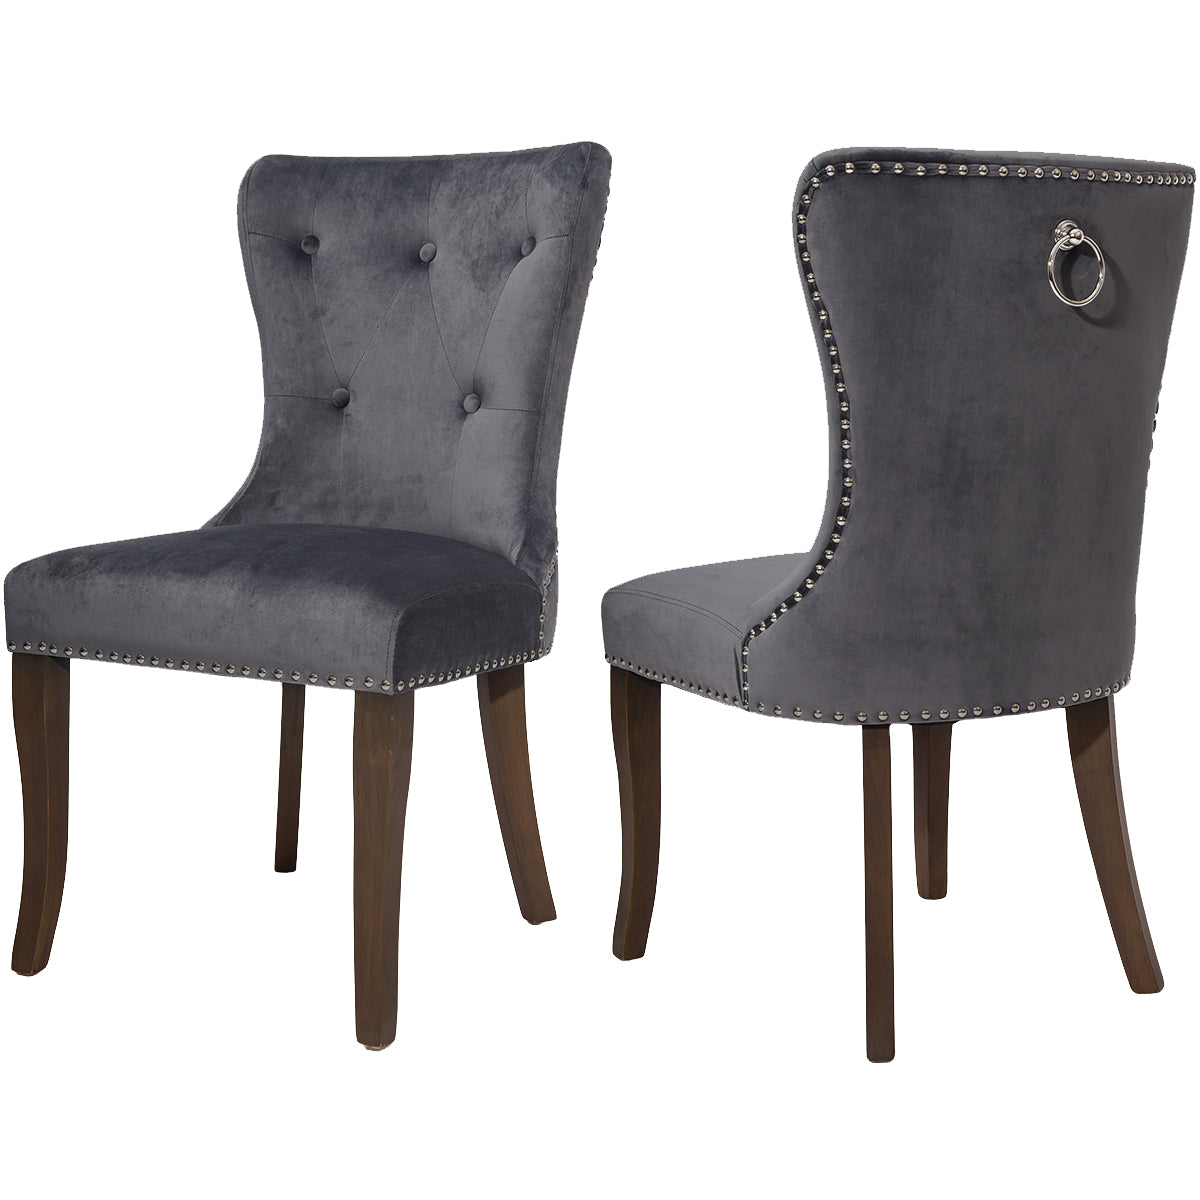 Victorian Dining Chair Button Tufted Armless Chair Upholstered Accent Chair, Nailhead Trim, Chair Ring Pull Set of 2 (Grey)